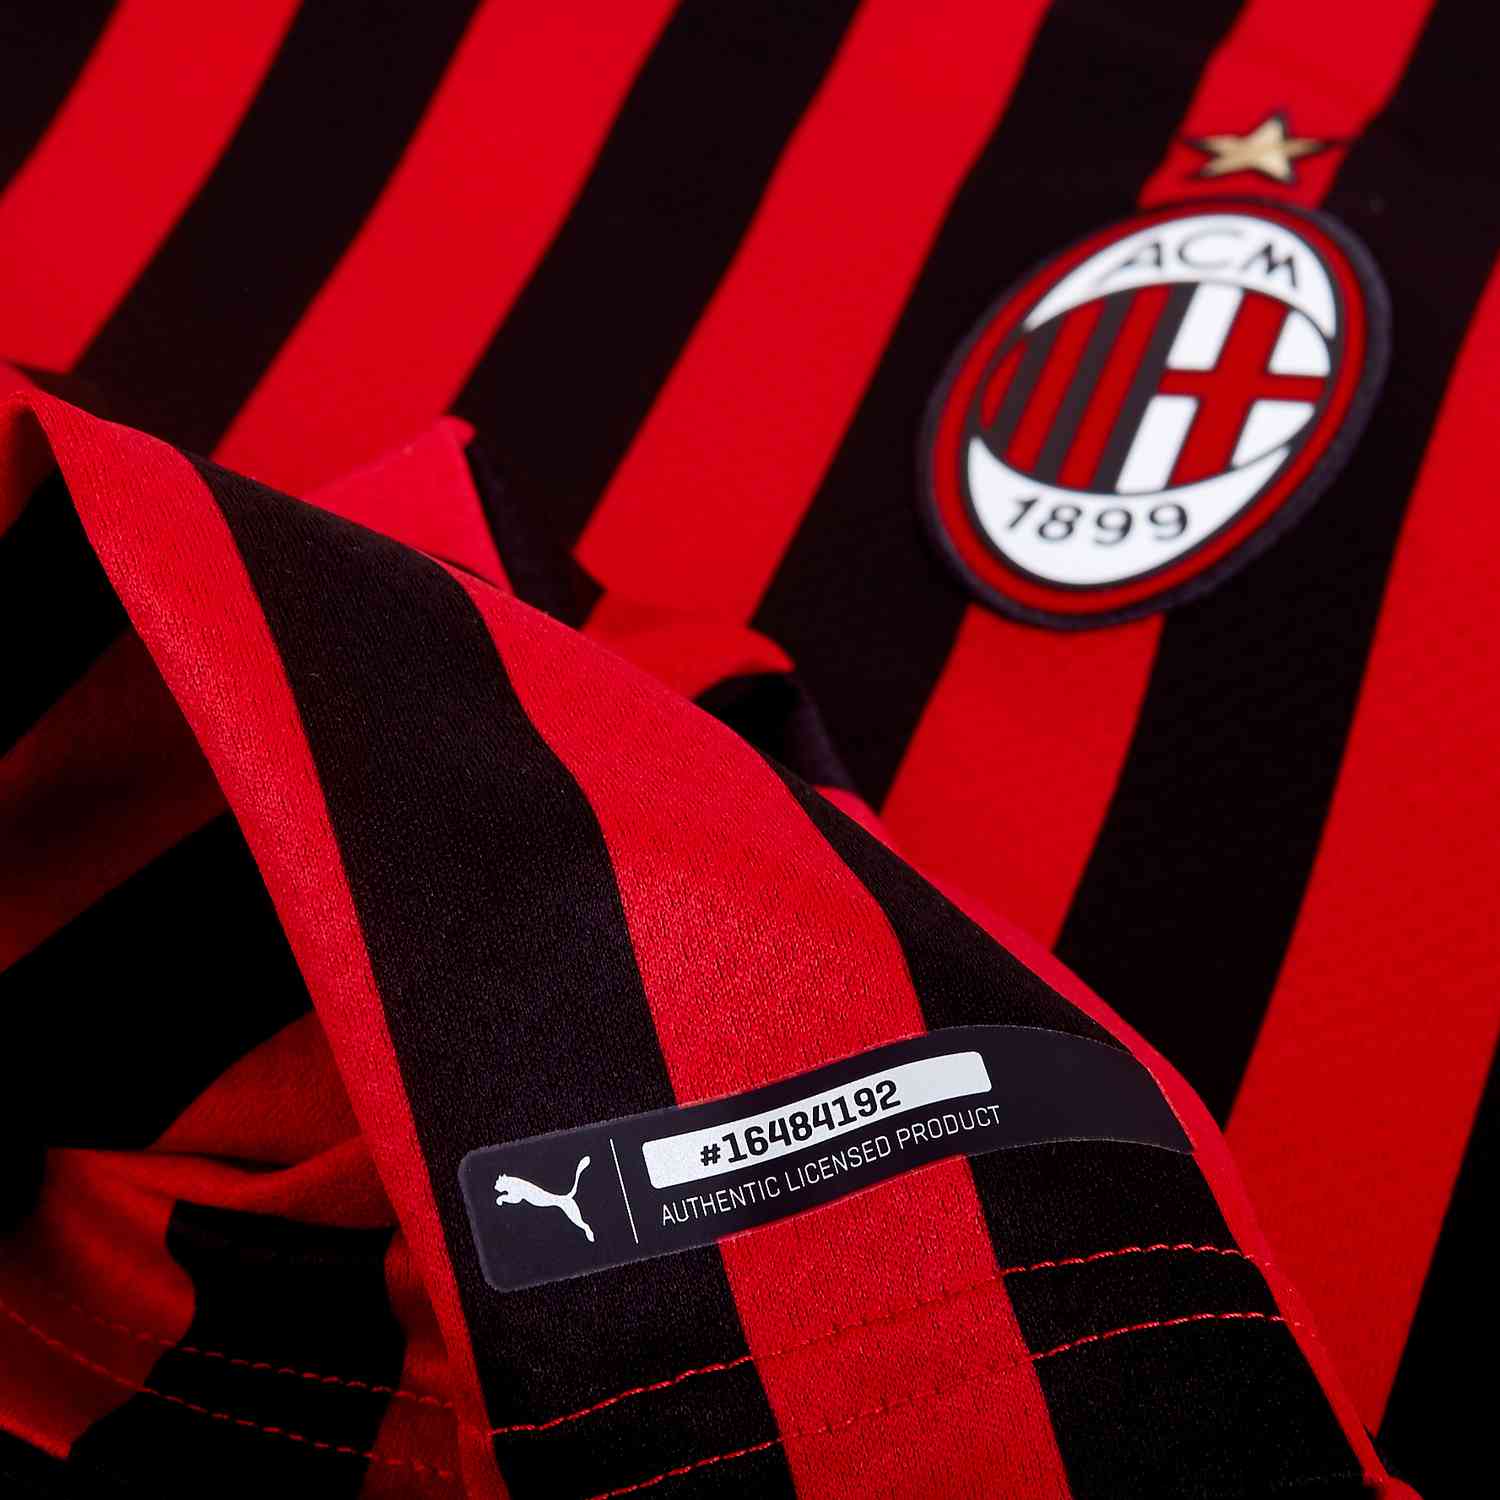 milan authentic jersey